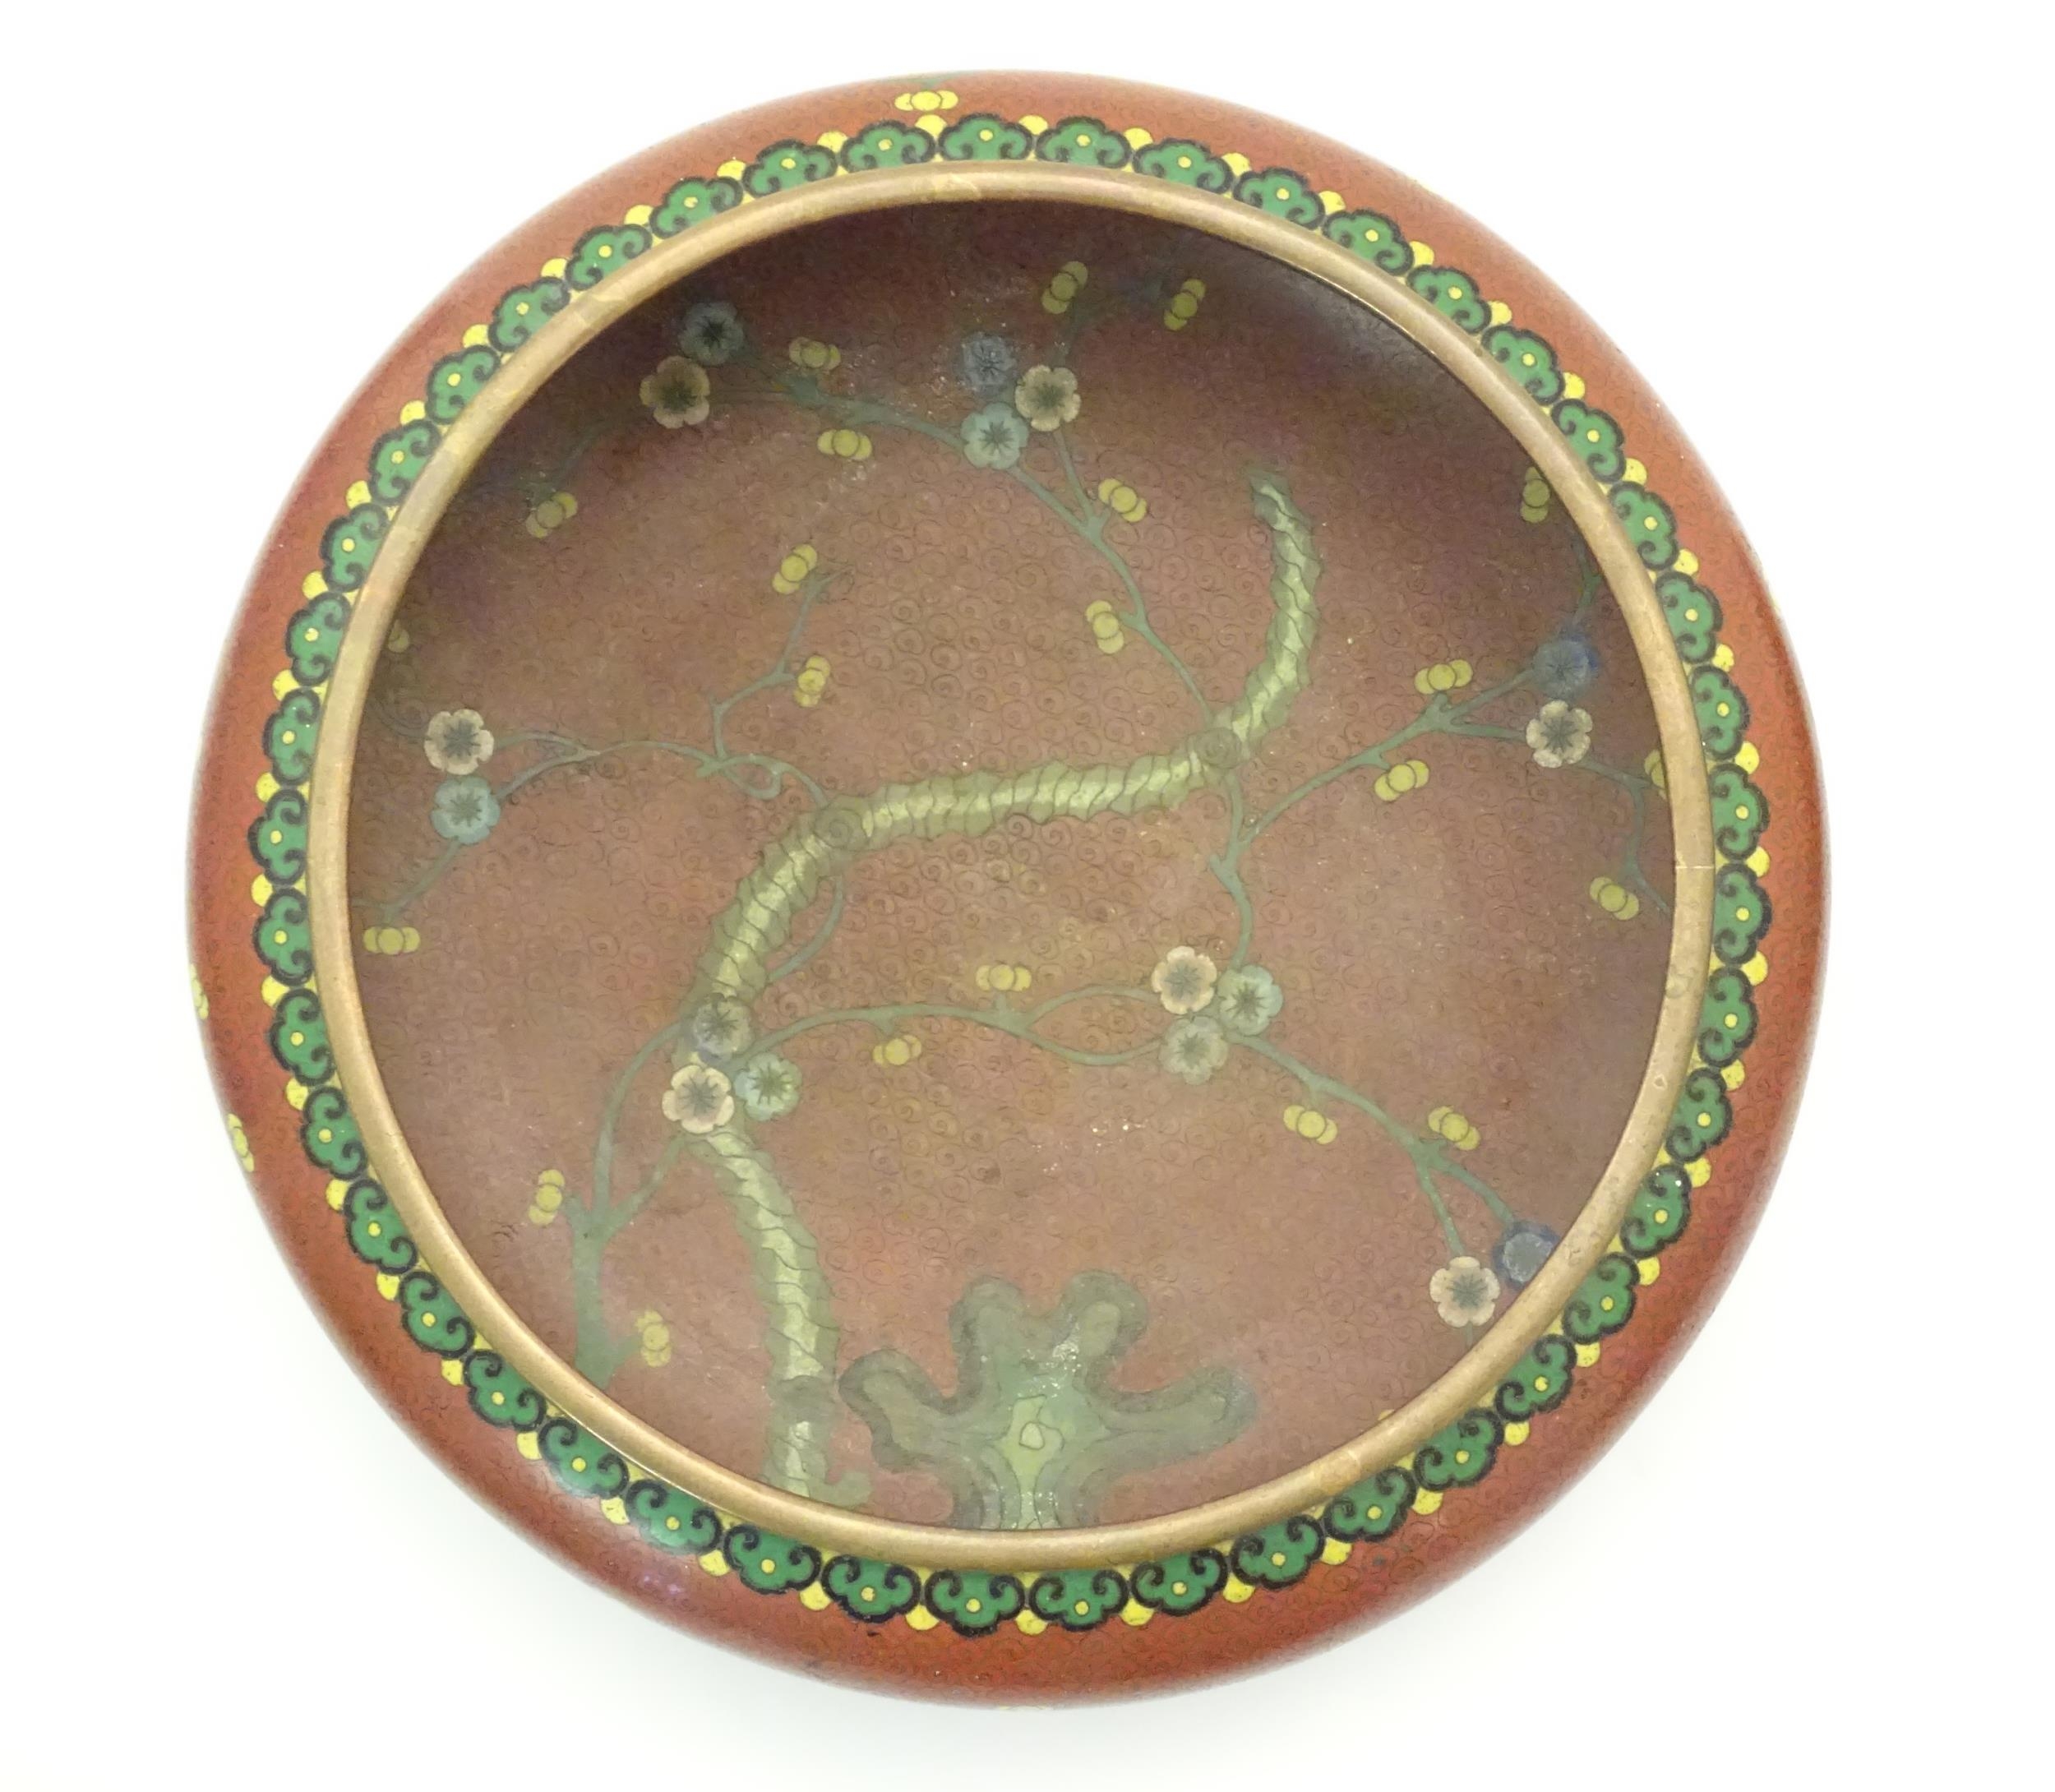 A Chinese cloisonne shallow bowl with floral and foliate detail. Approx. 3 1/4" x 10" diameter - Image 2 of 6